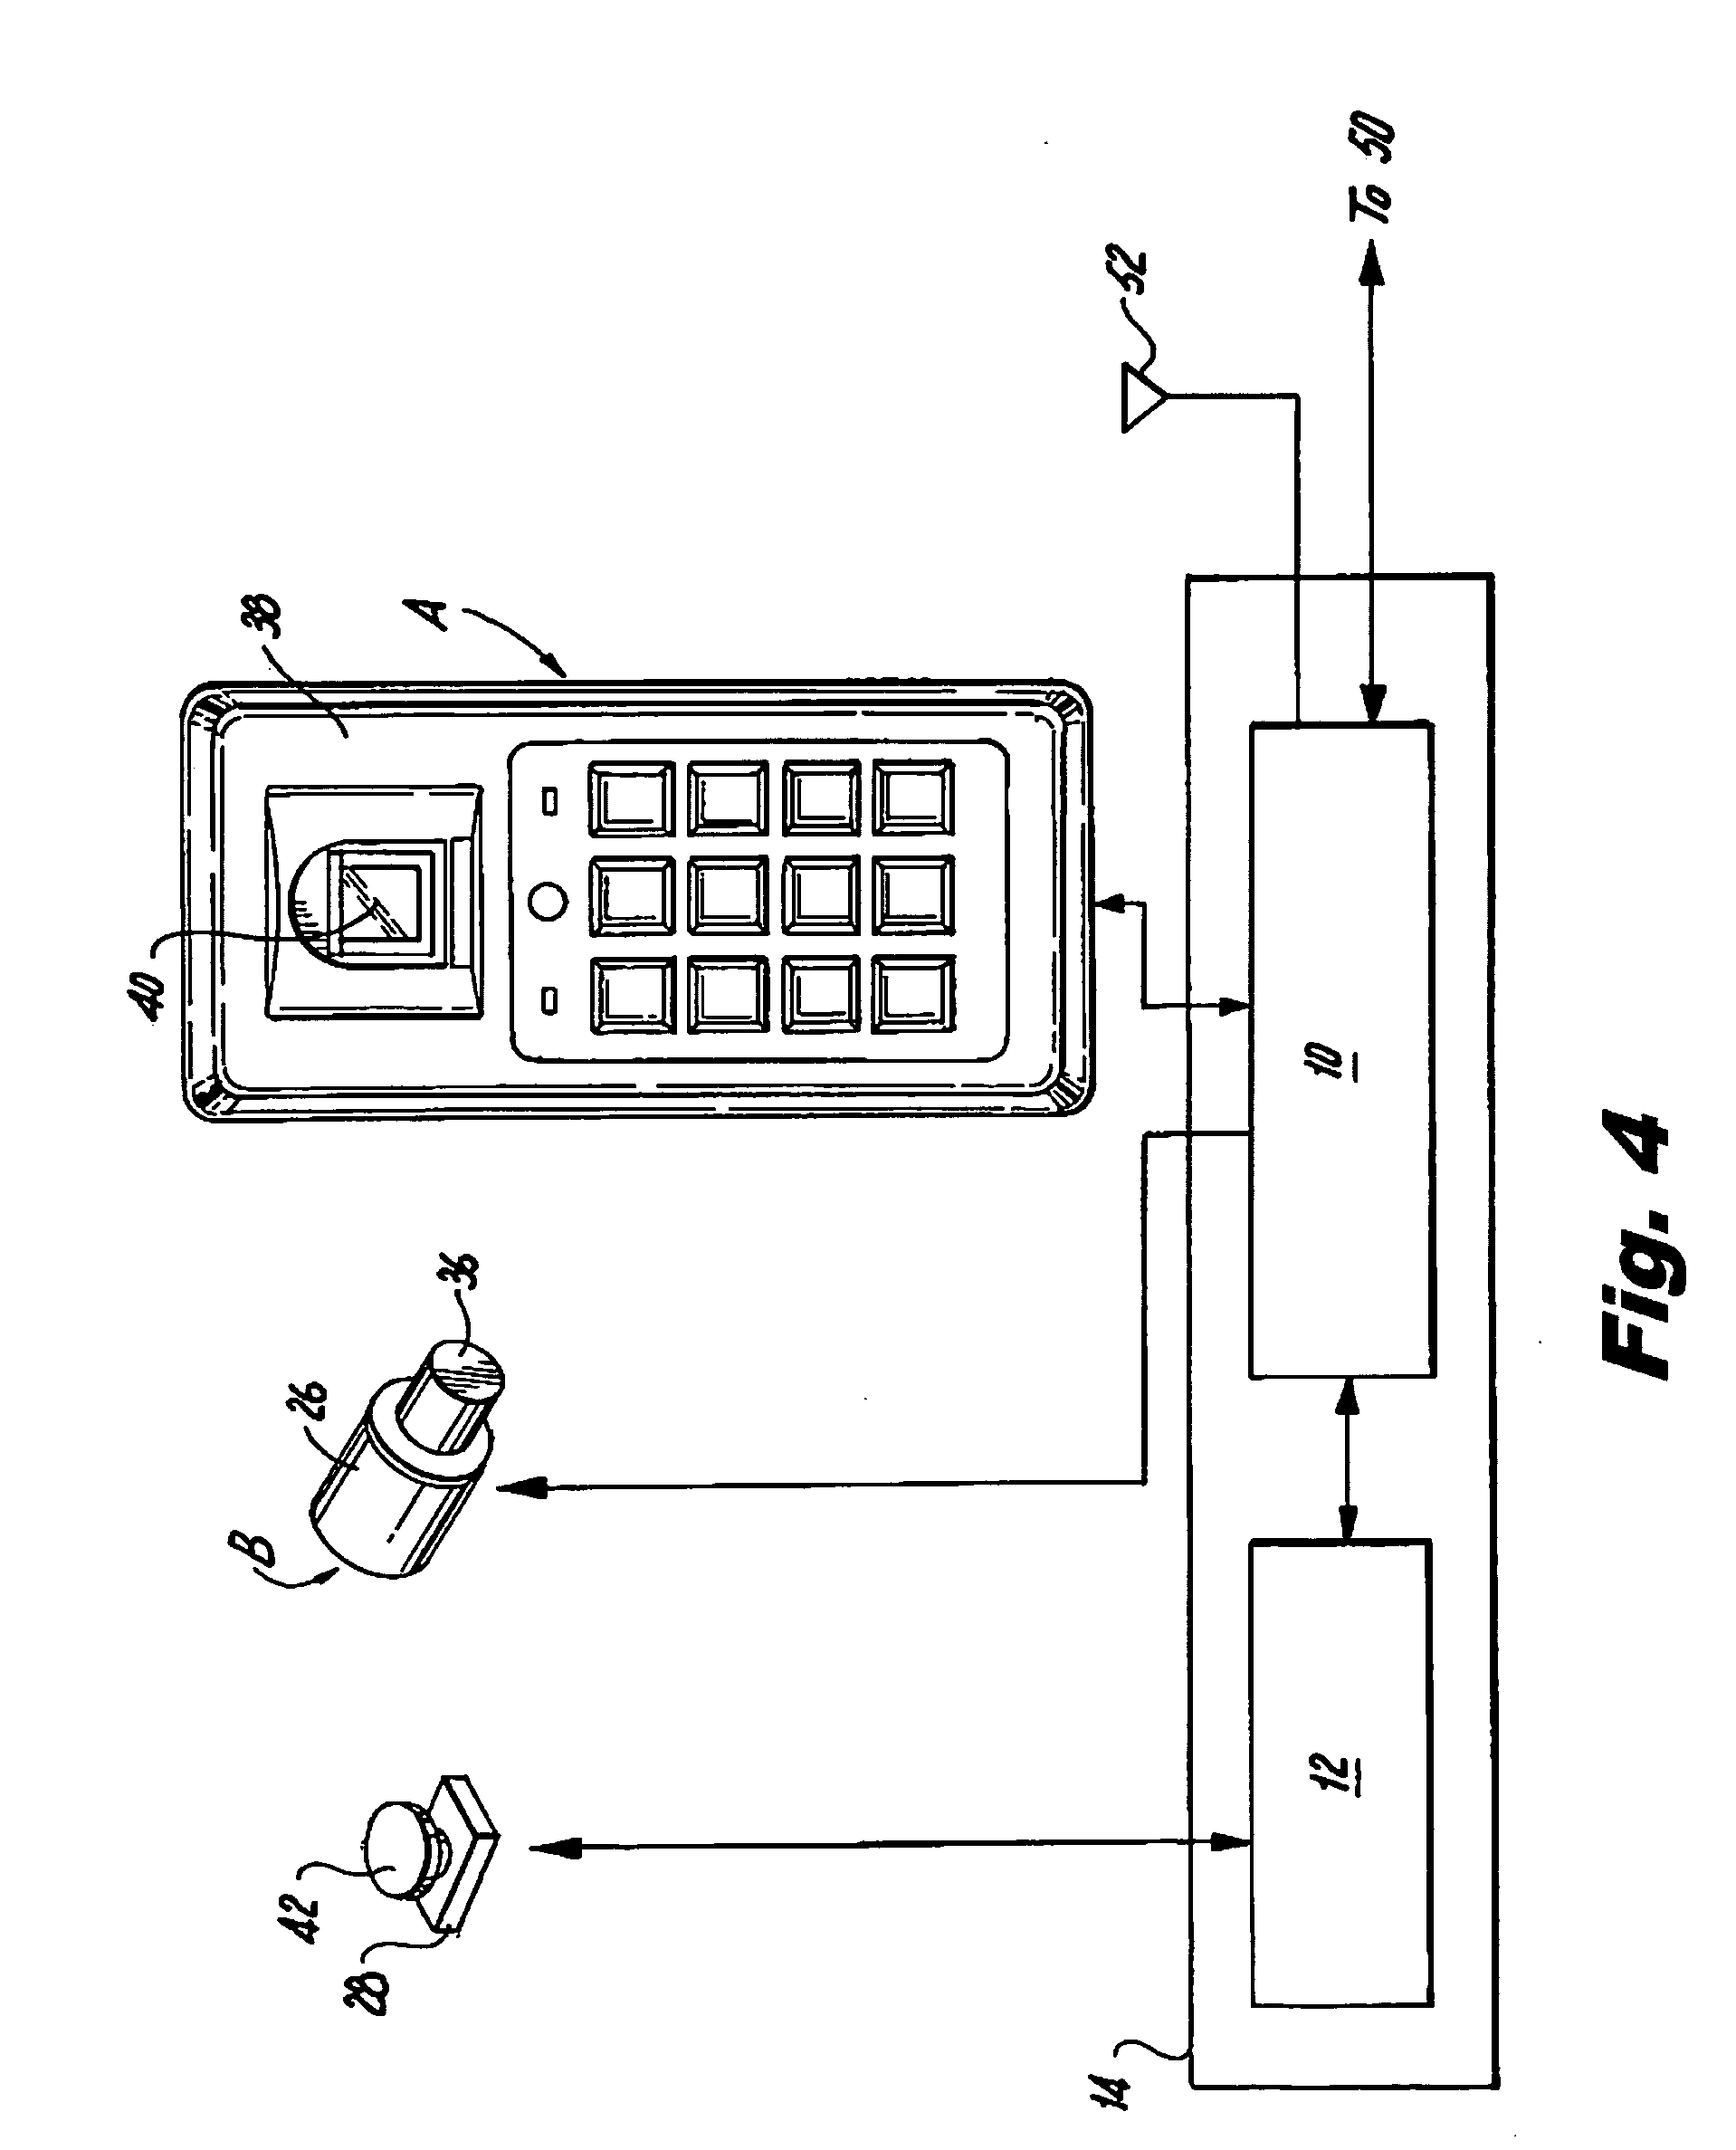 System for preventing theft of articles from an enclosure